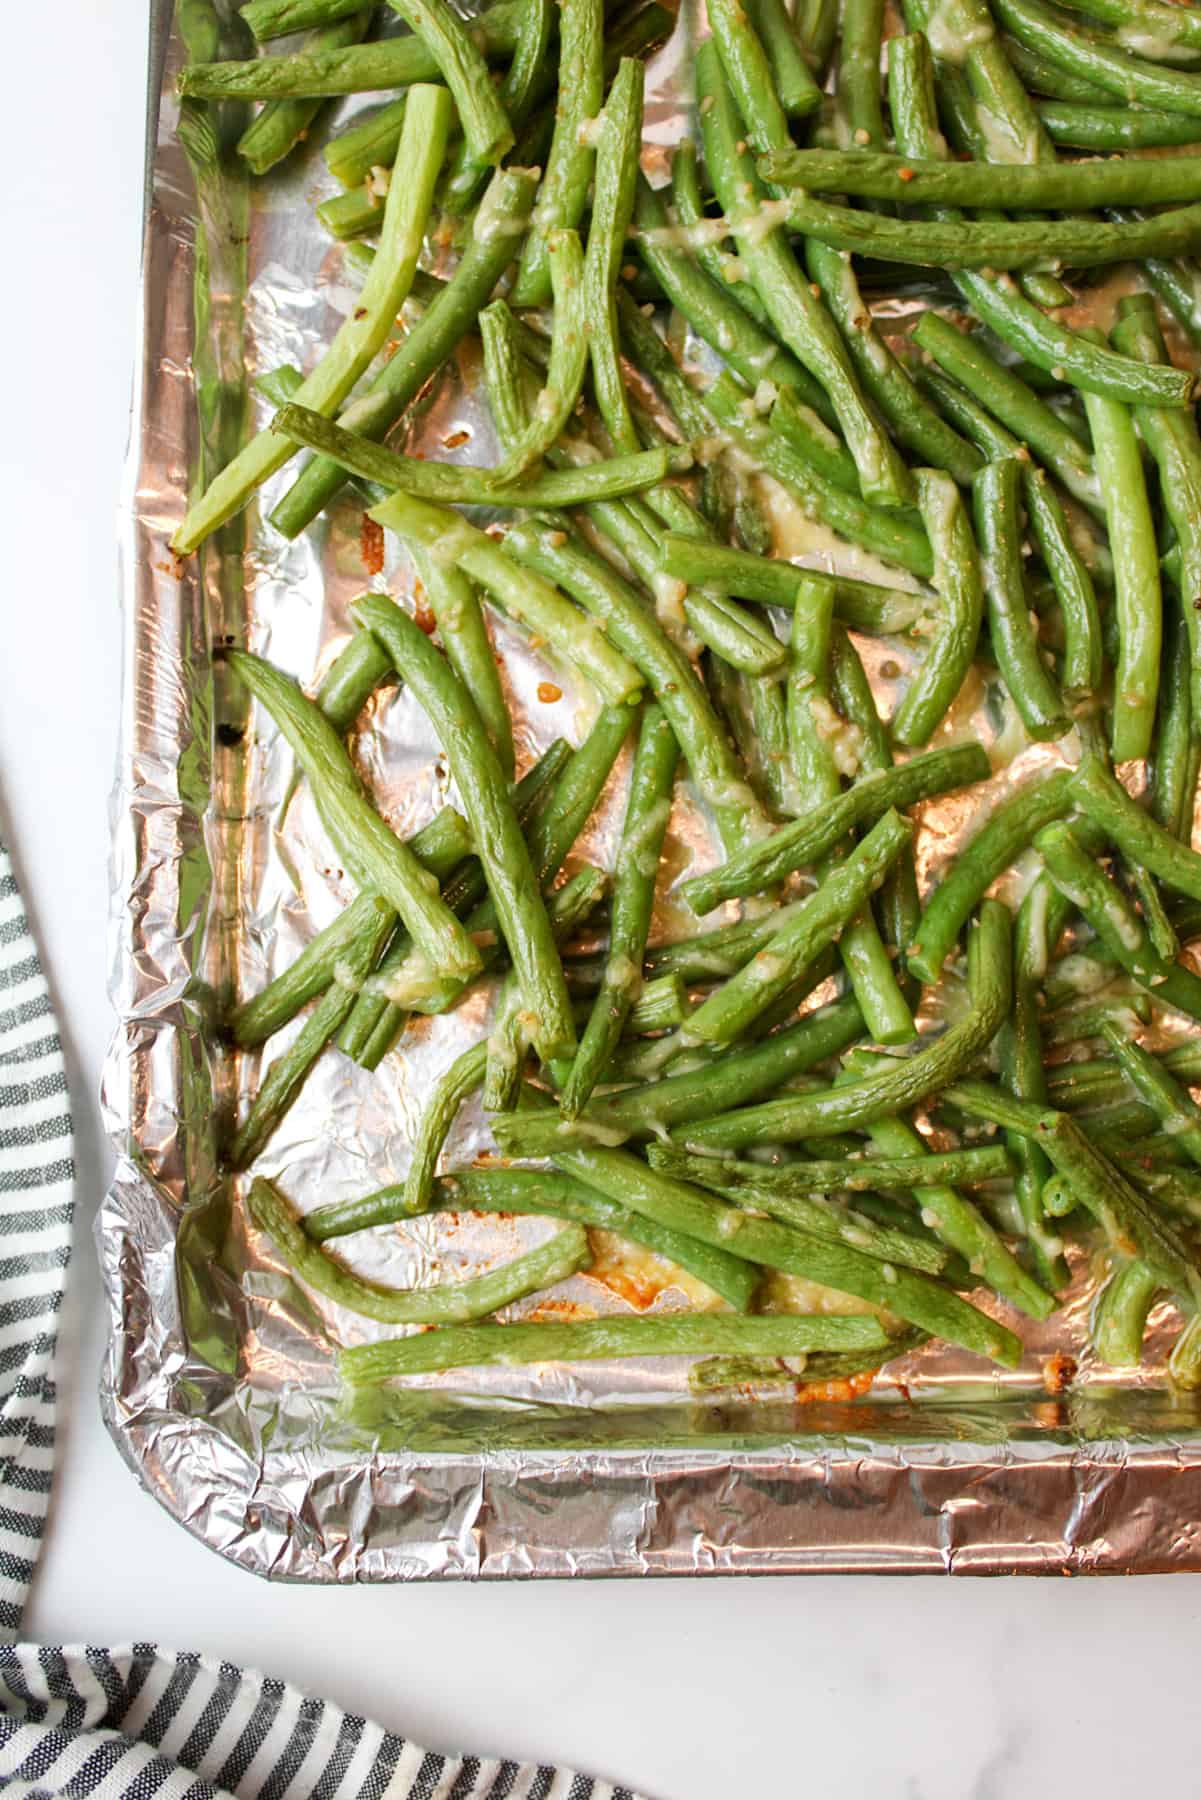 aerial view of a corner of a baking sheet topped with foil and roasted parmesan garlic green beans